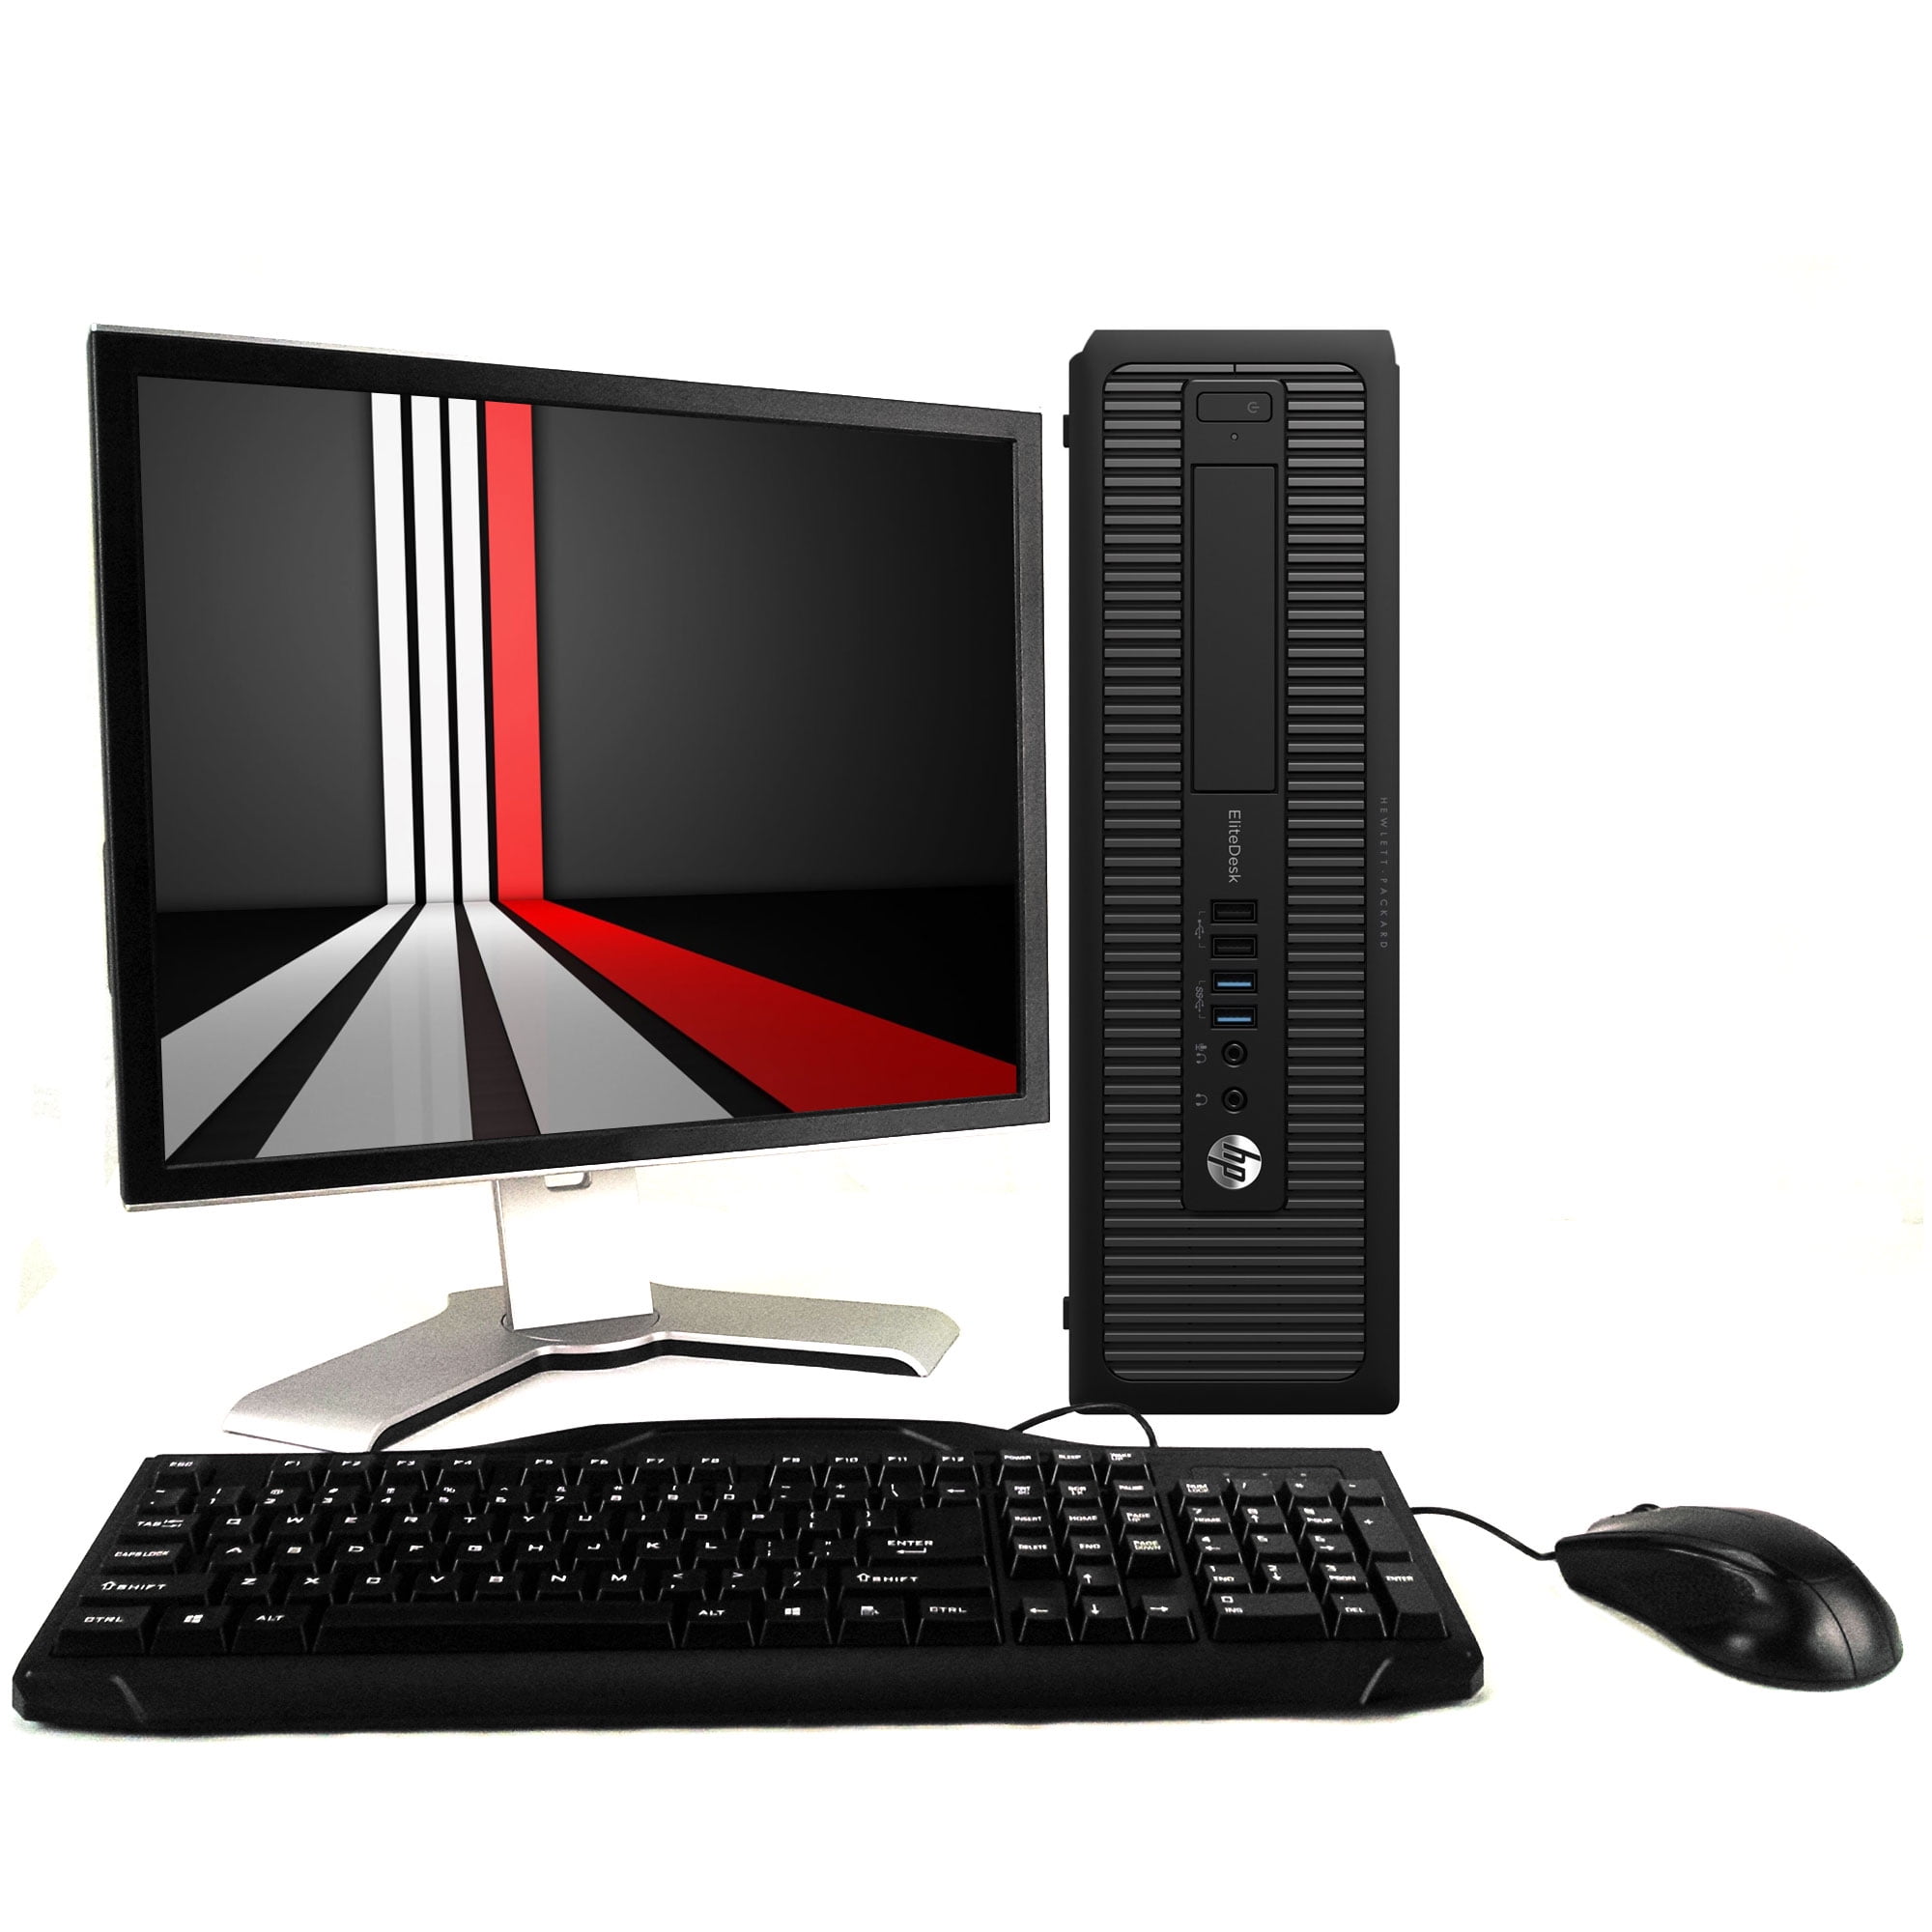 HP Desktops: Revolutionizing Workspaces with Innovative Monitors for the Modern Office